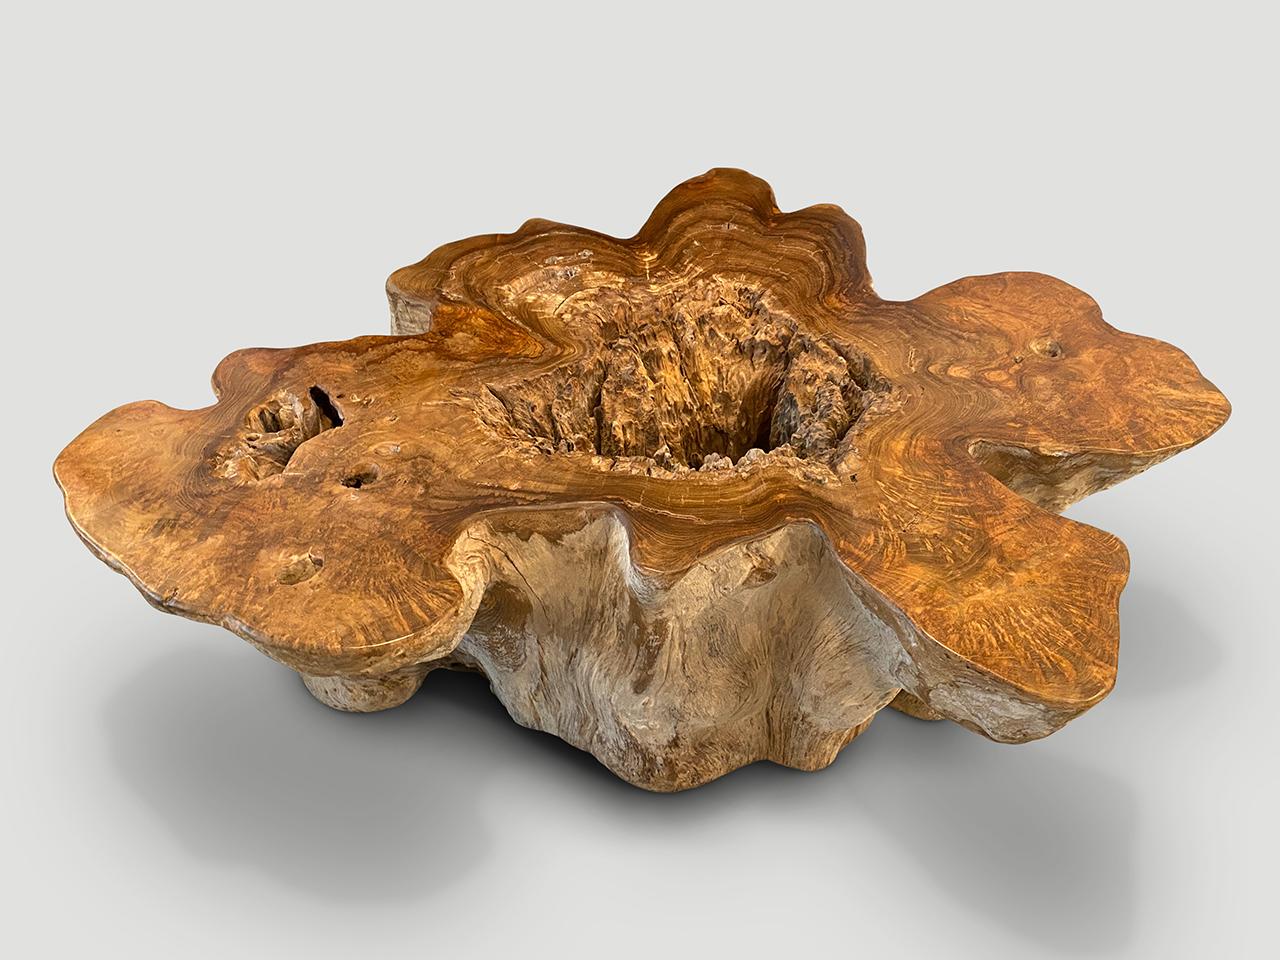 Impressive reclaimed teak root coffee hand carved into this usable shape whilst respecting the natural organic wood. We polished the top with a natural oil finish revealing the beautiful wood grain. The sides are sanded and left raw in contrast. The